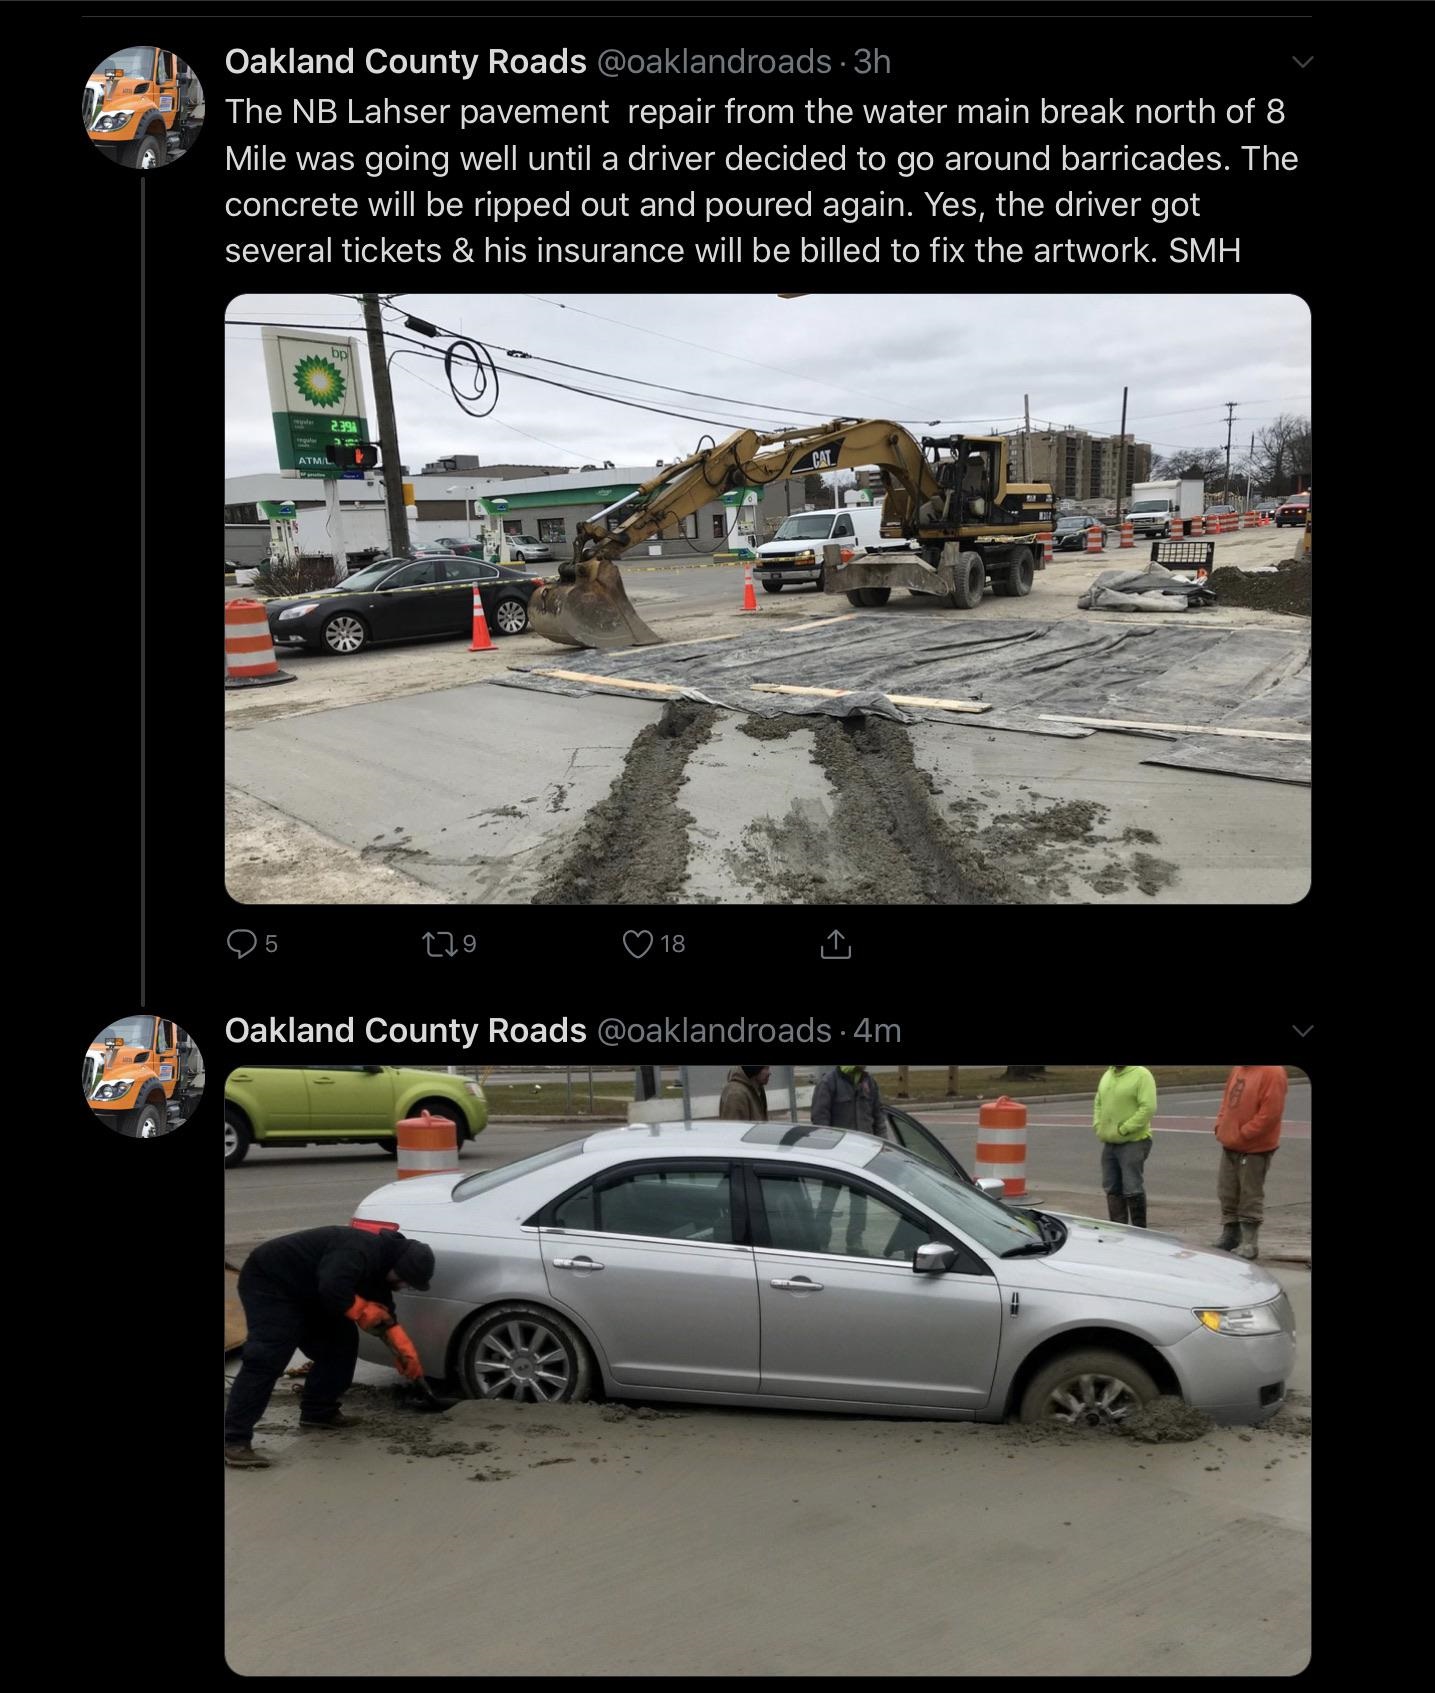 family car - Oakland County Roads 3h The Nb Lahser pavement repair from the water main break north of 8 Mile was going well until a driver decided to go around barricades. The concrete will be ripped out and poured again. Yes, the driver got several ticke